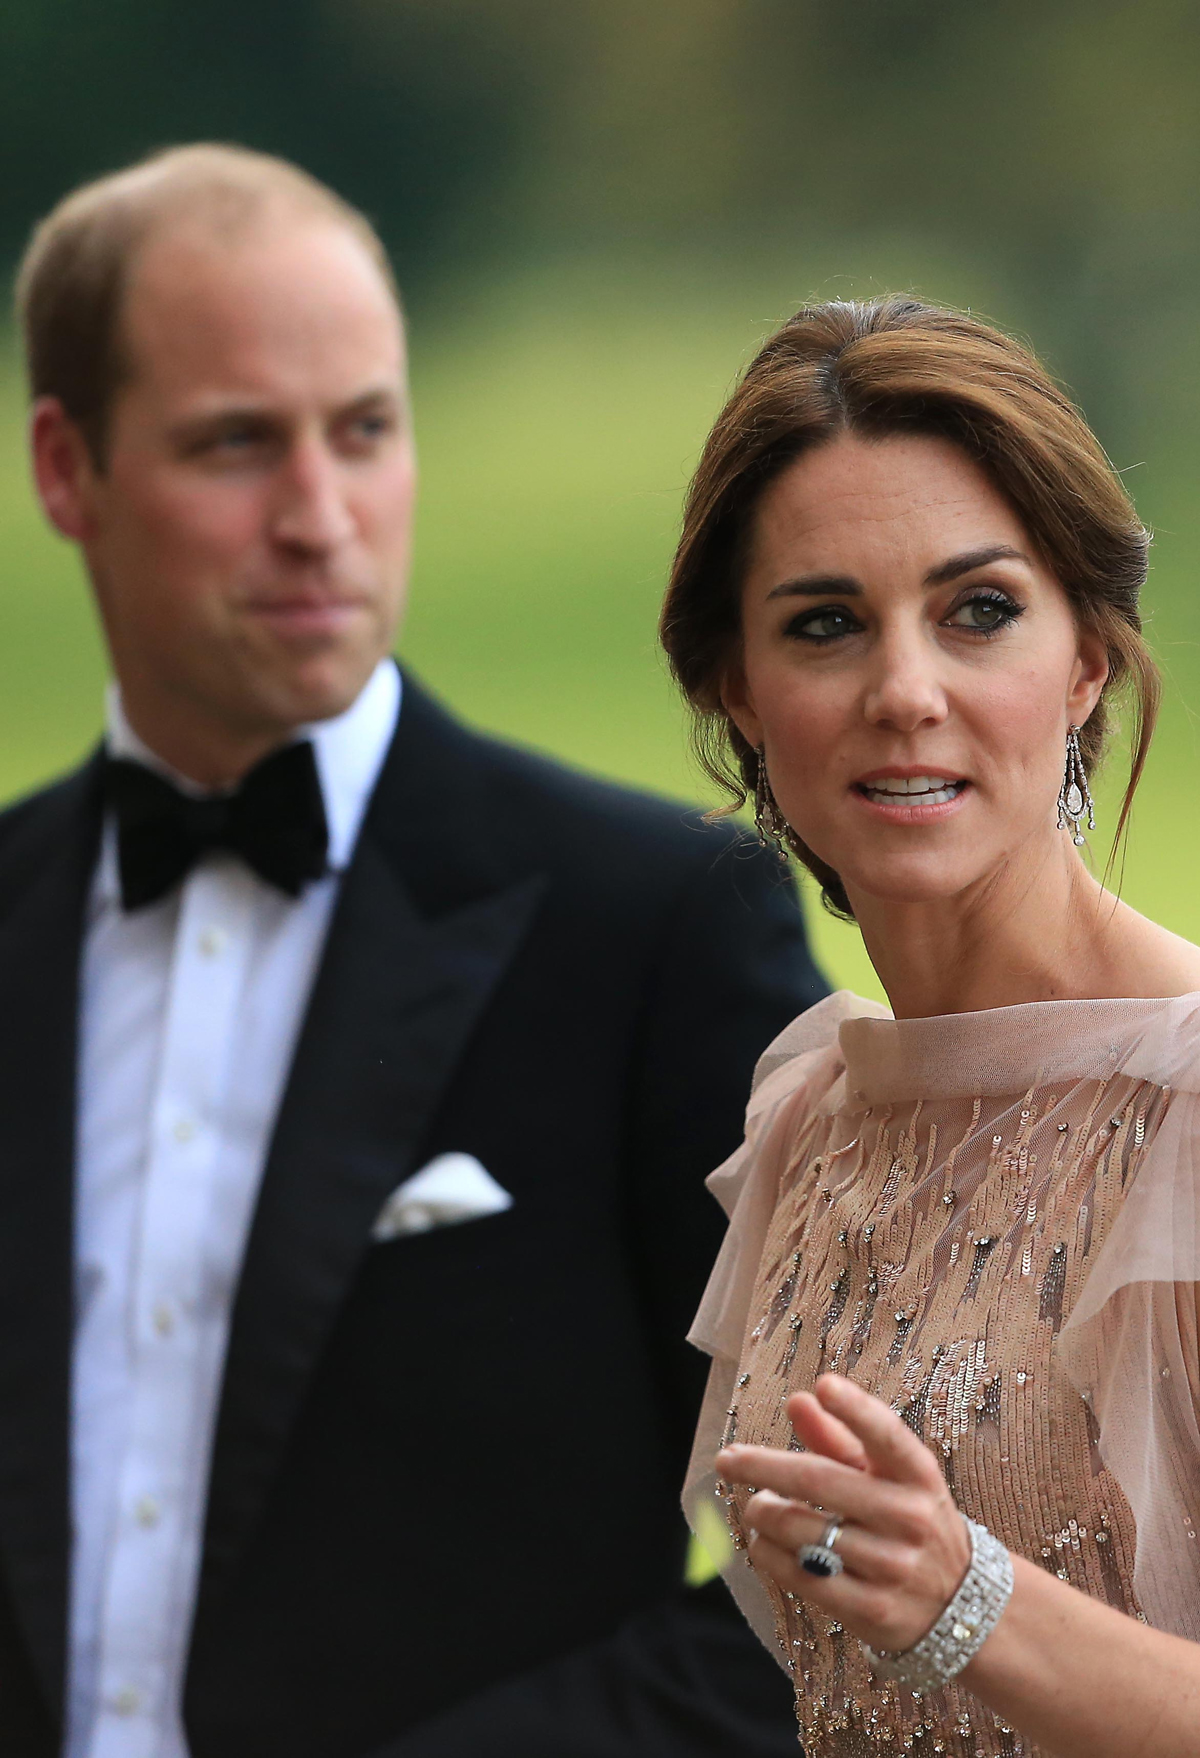 The Duke and Duchess of Cambridge attend a gala dinner in support of East Anglia's Children's Hospices at Houghton Hall on June 22, 2016 (Stephen Pond/Getty Images)